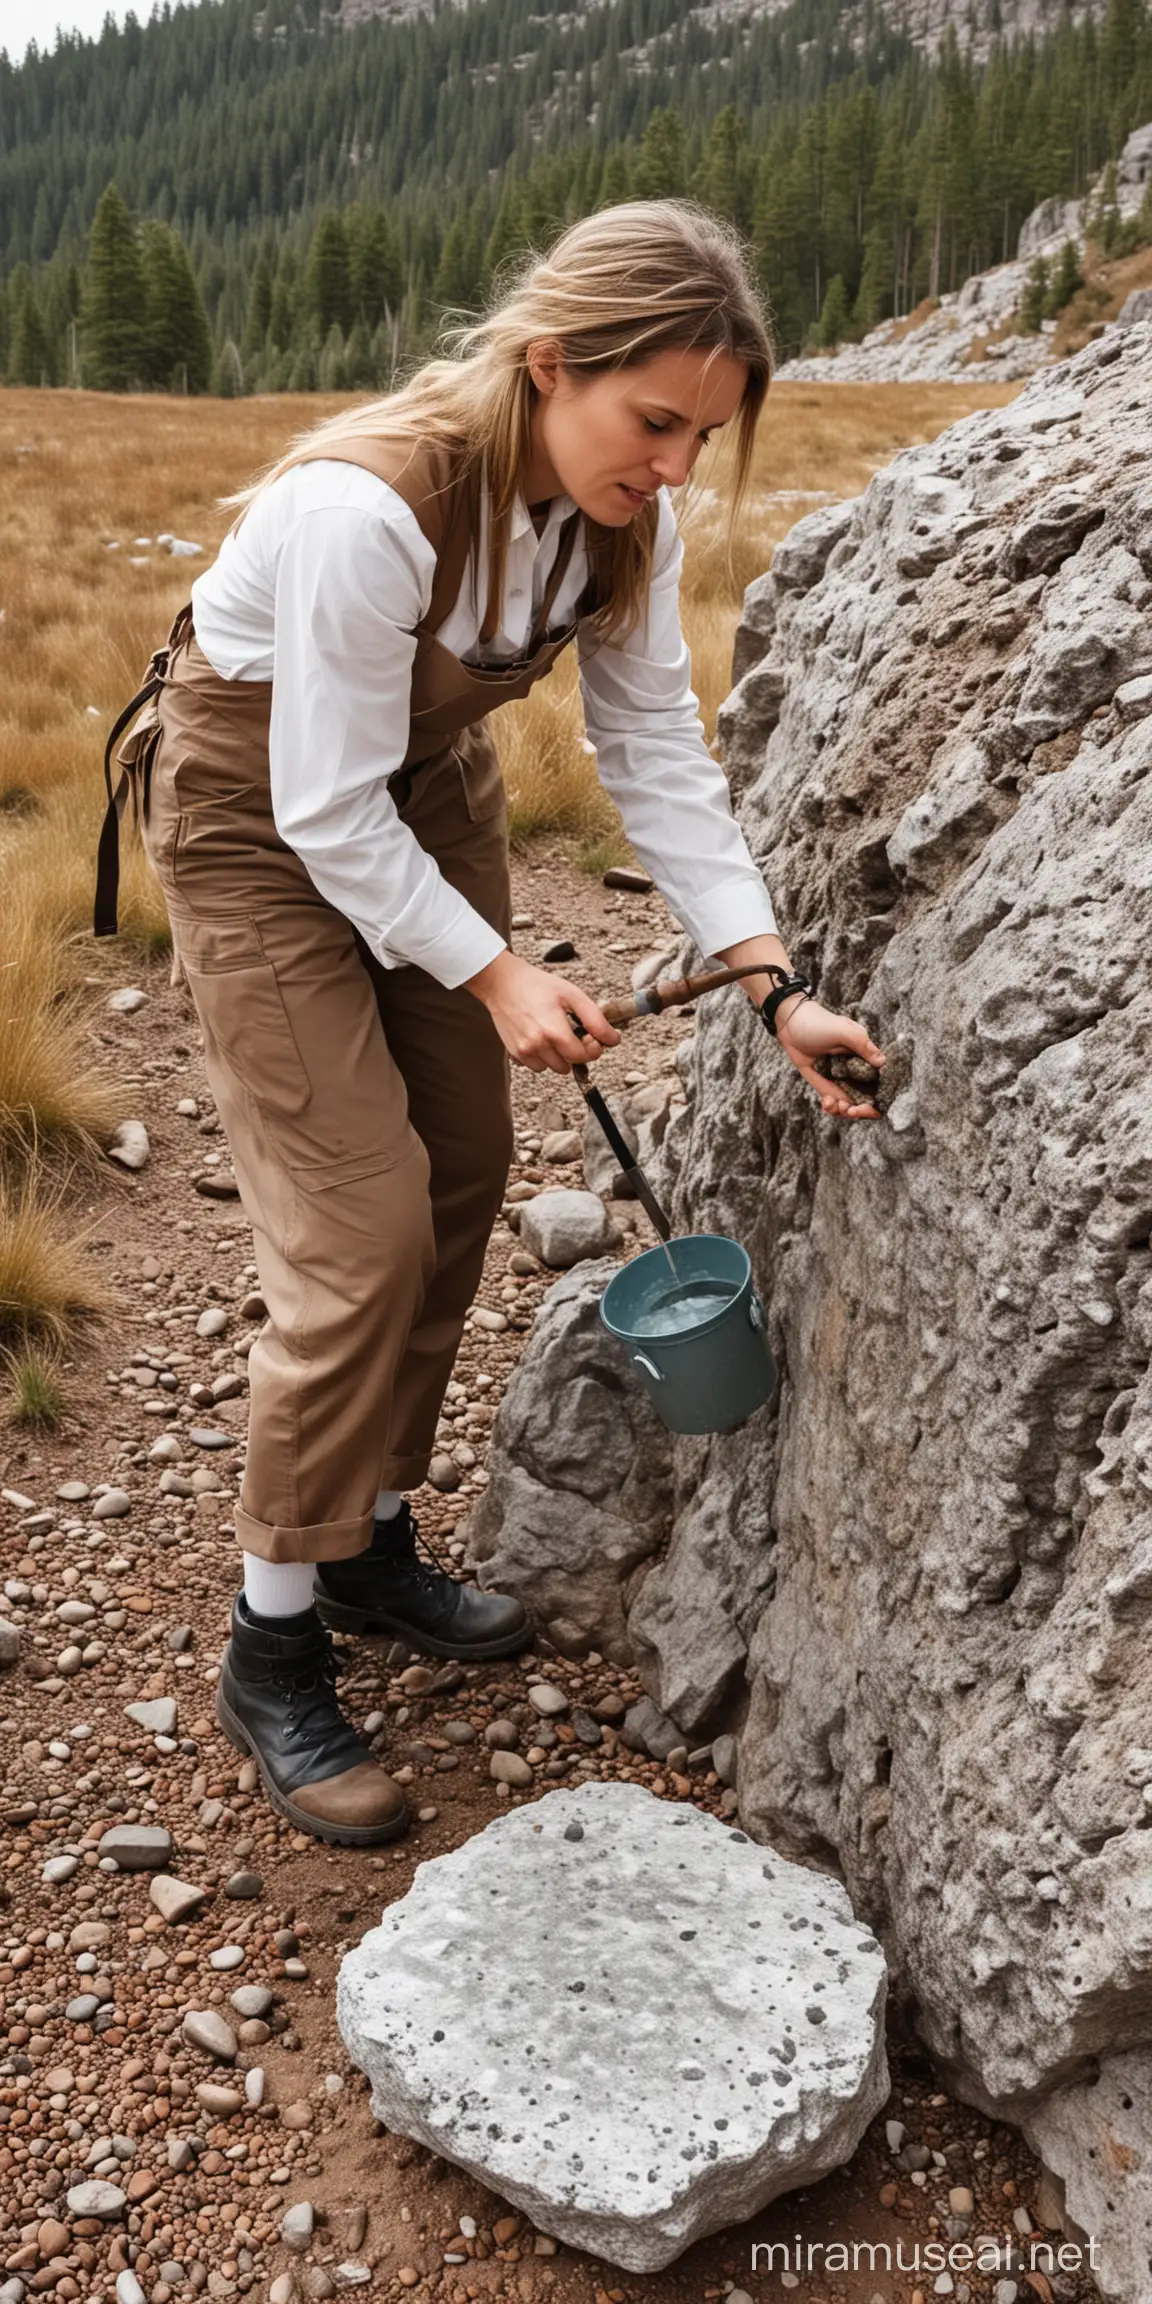 Geologist Using Acid to Extract Minerals from Rock Formation